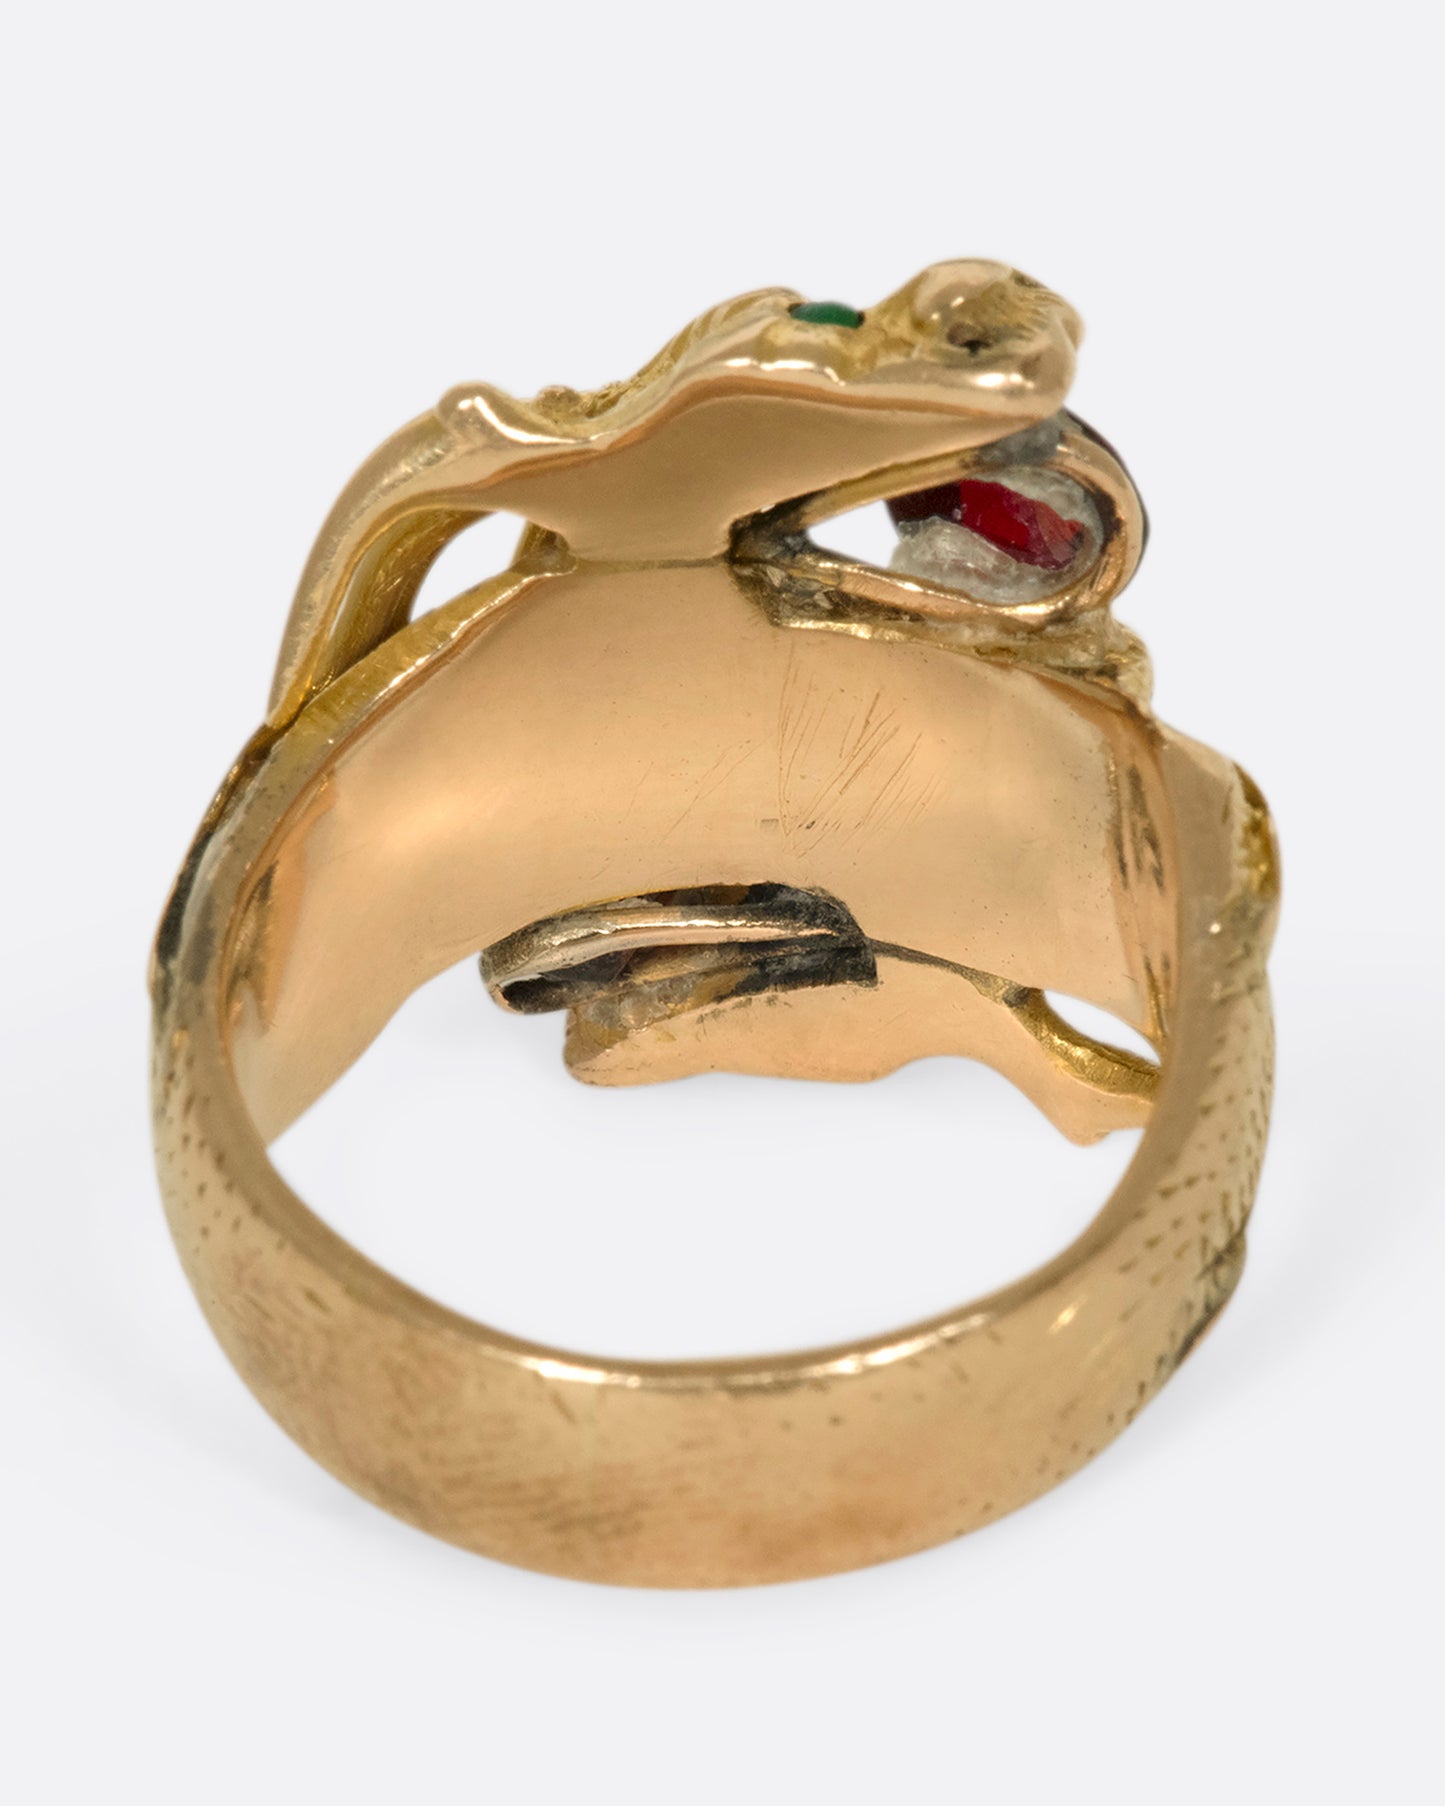 A view of the underside of a yellow gold ring with two wrapped dragons, each with emerald eyes and garnets in their mouths.